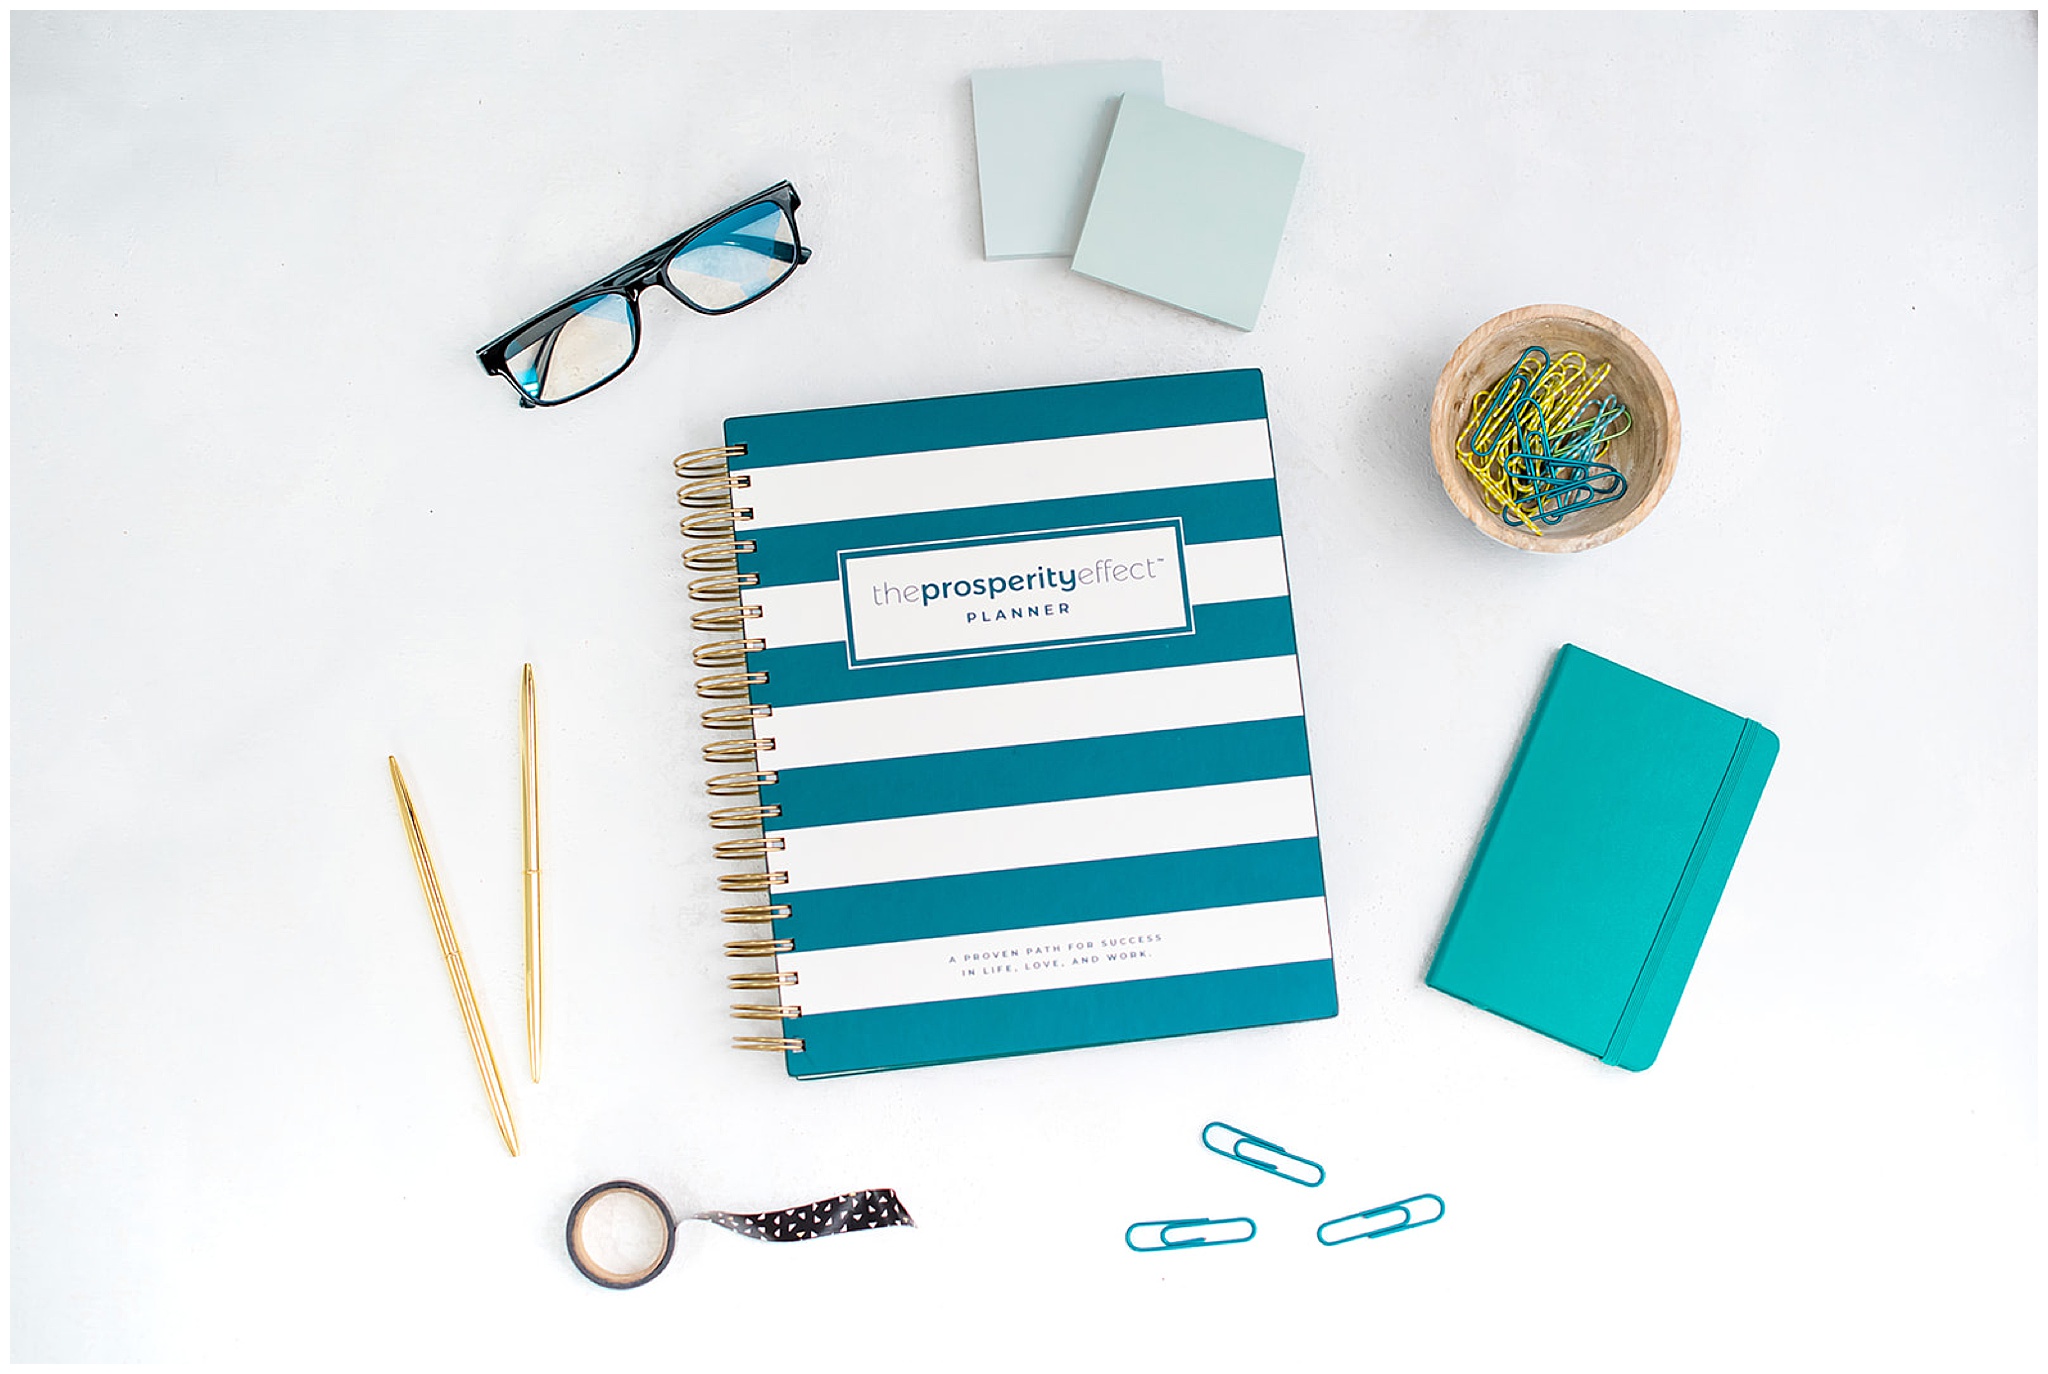 flatlay of prosperity effect planner with office items